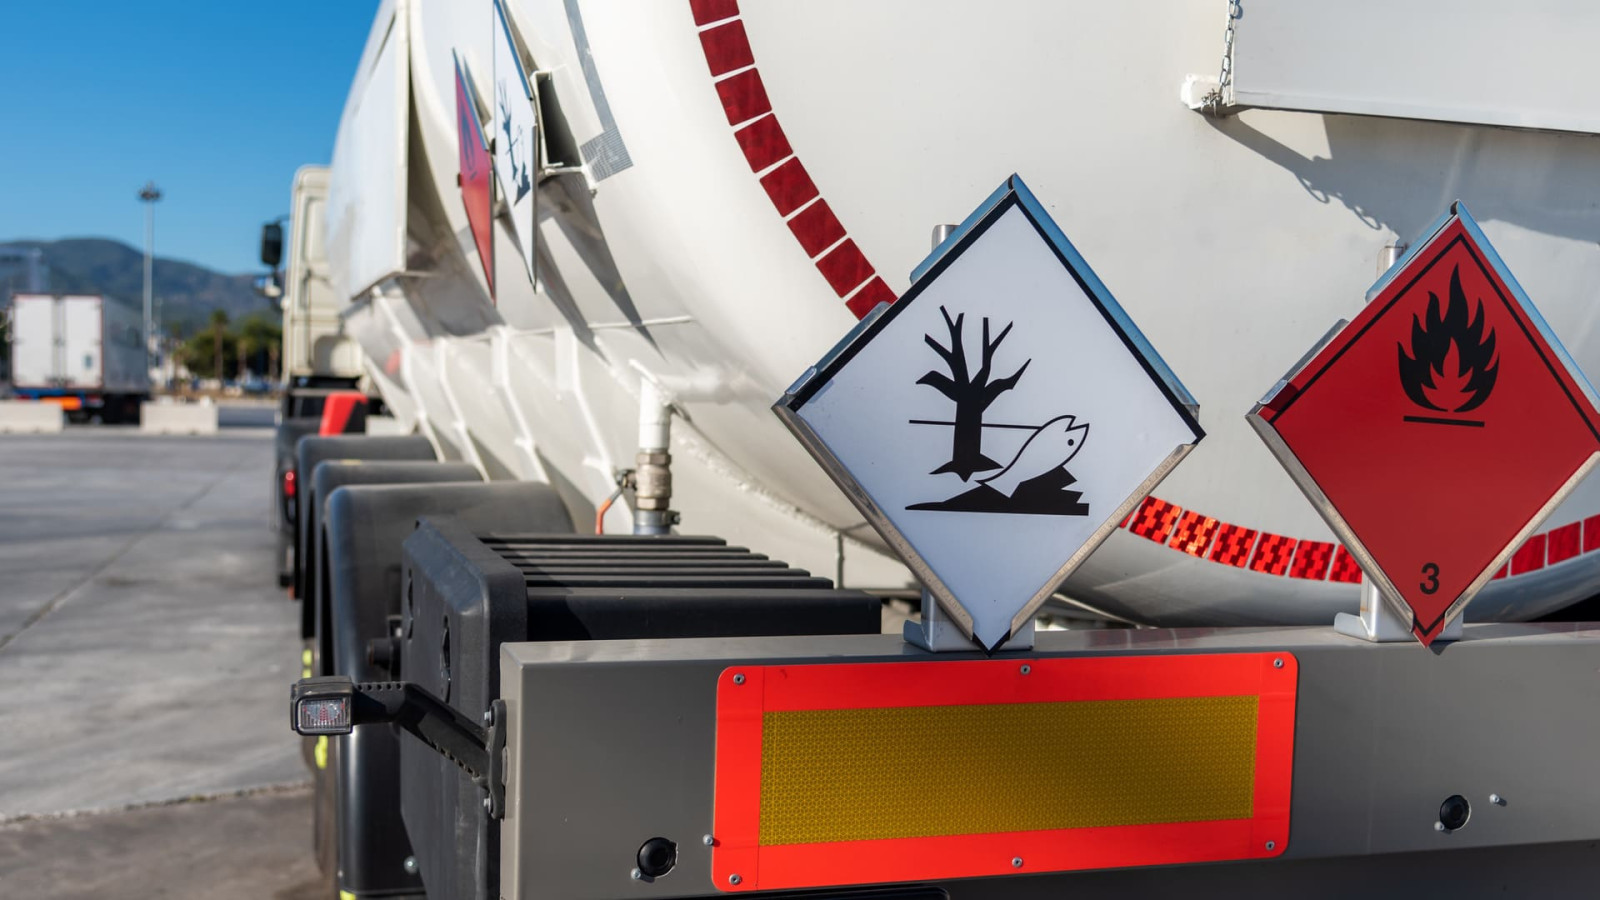 Transport of Dangerous Goods (ADR) - everything you need to know